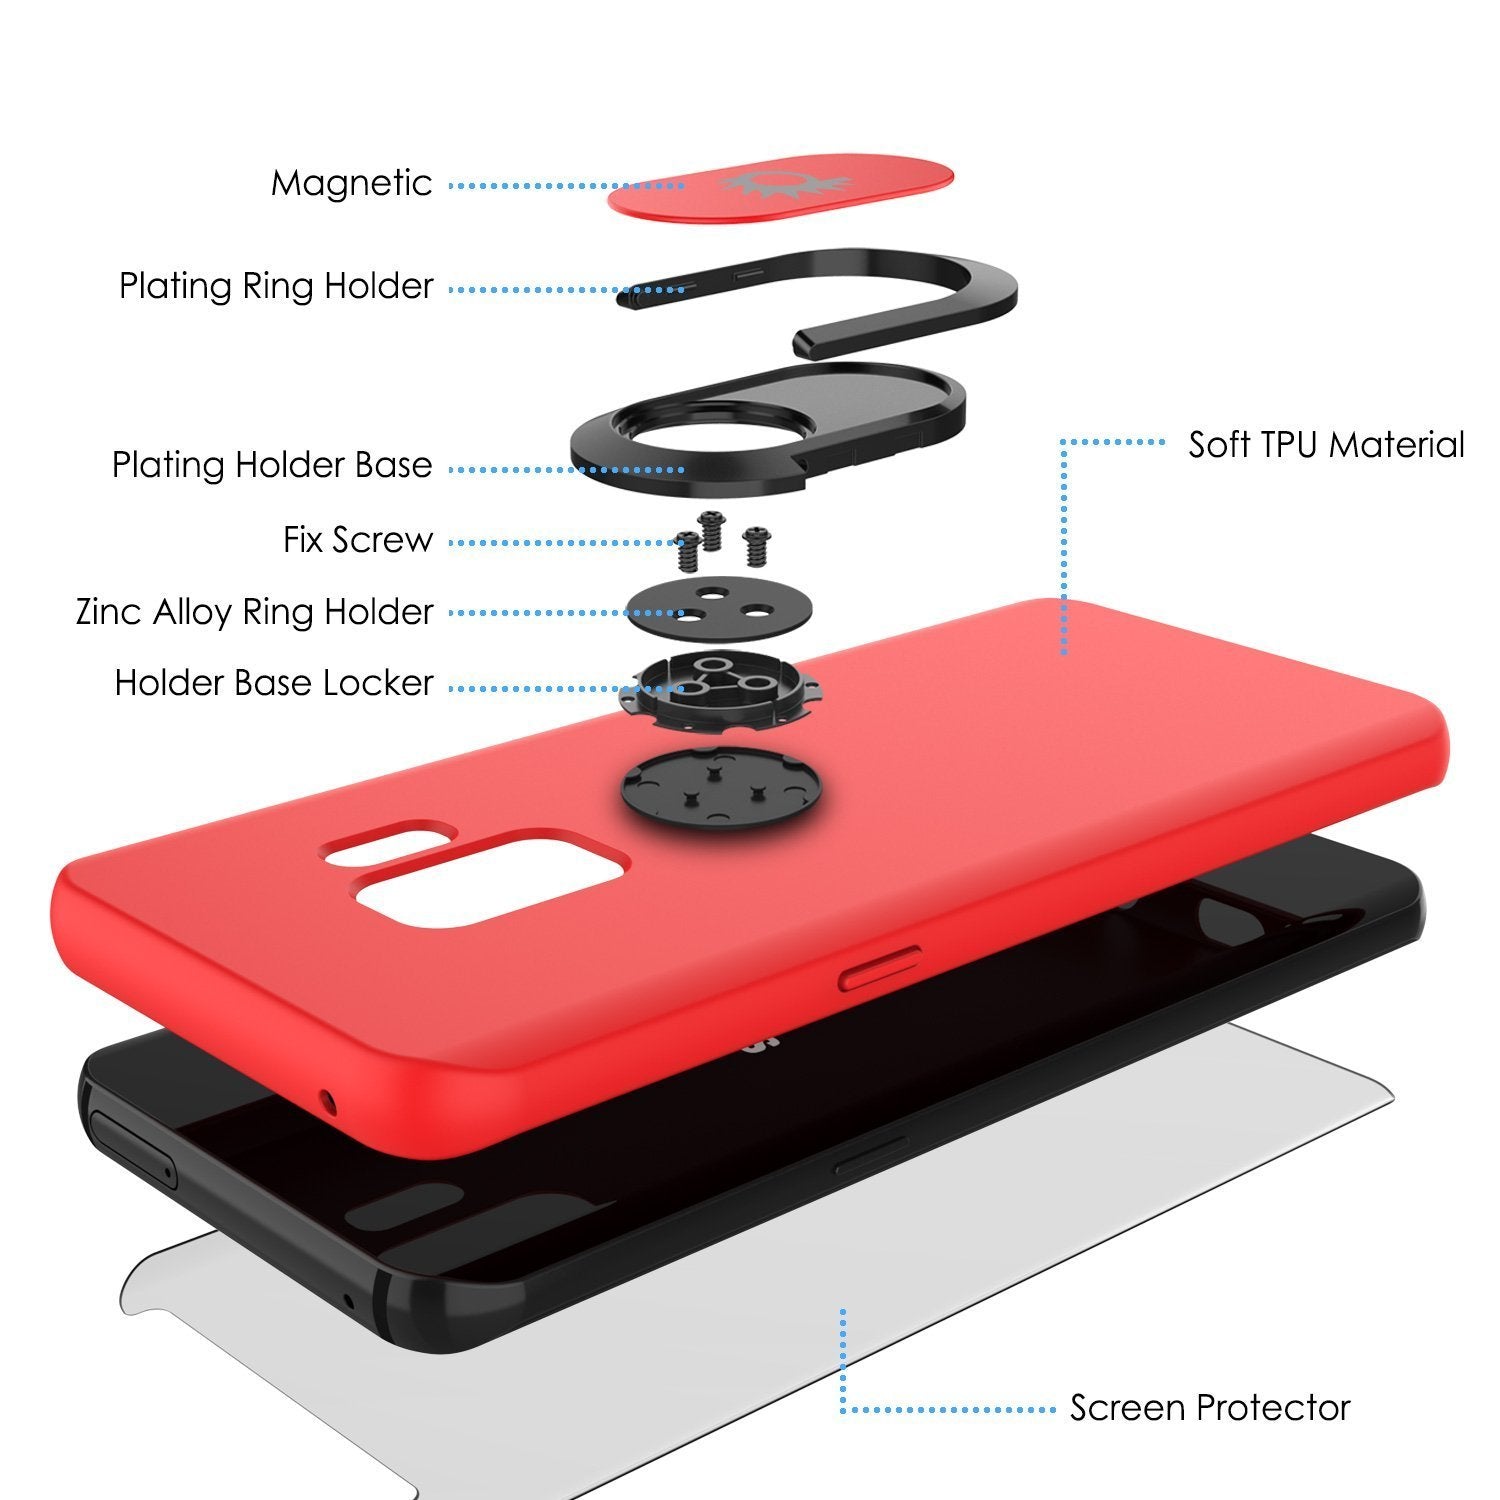 Galaxy S9 Case, Punkcase Magnetix Protective TPU Cover W/ Kickstand, Ring Grip Holder & Metal Plate for Magnetic Car Phone Mount PLUS PunkShield Screen Protector for Samsung S9 Edge [Red] - PunkCase NZ